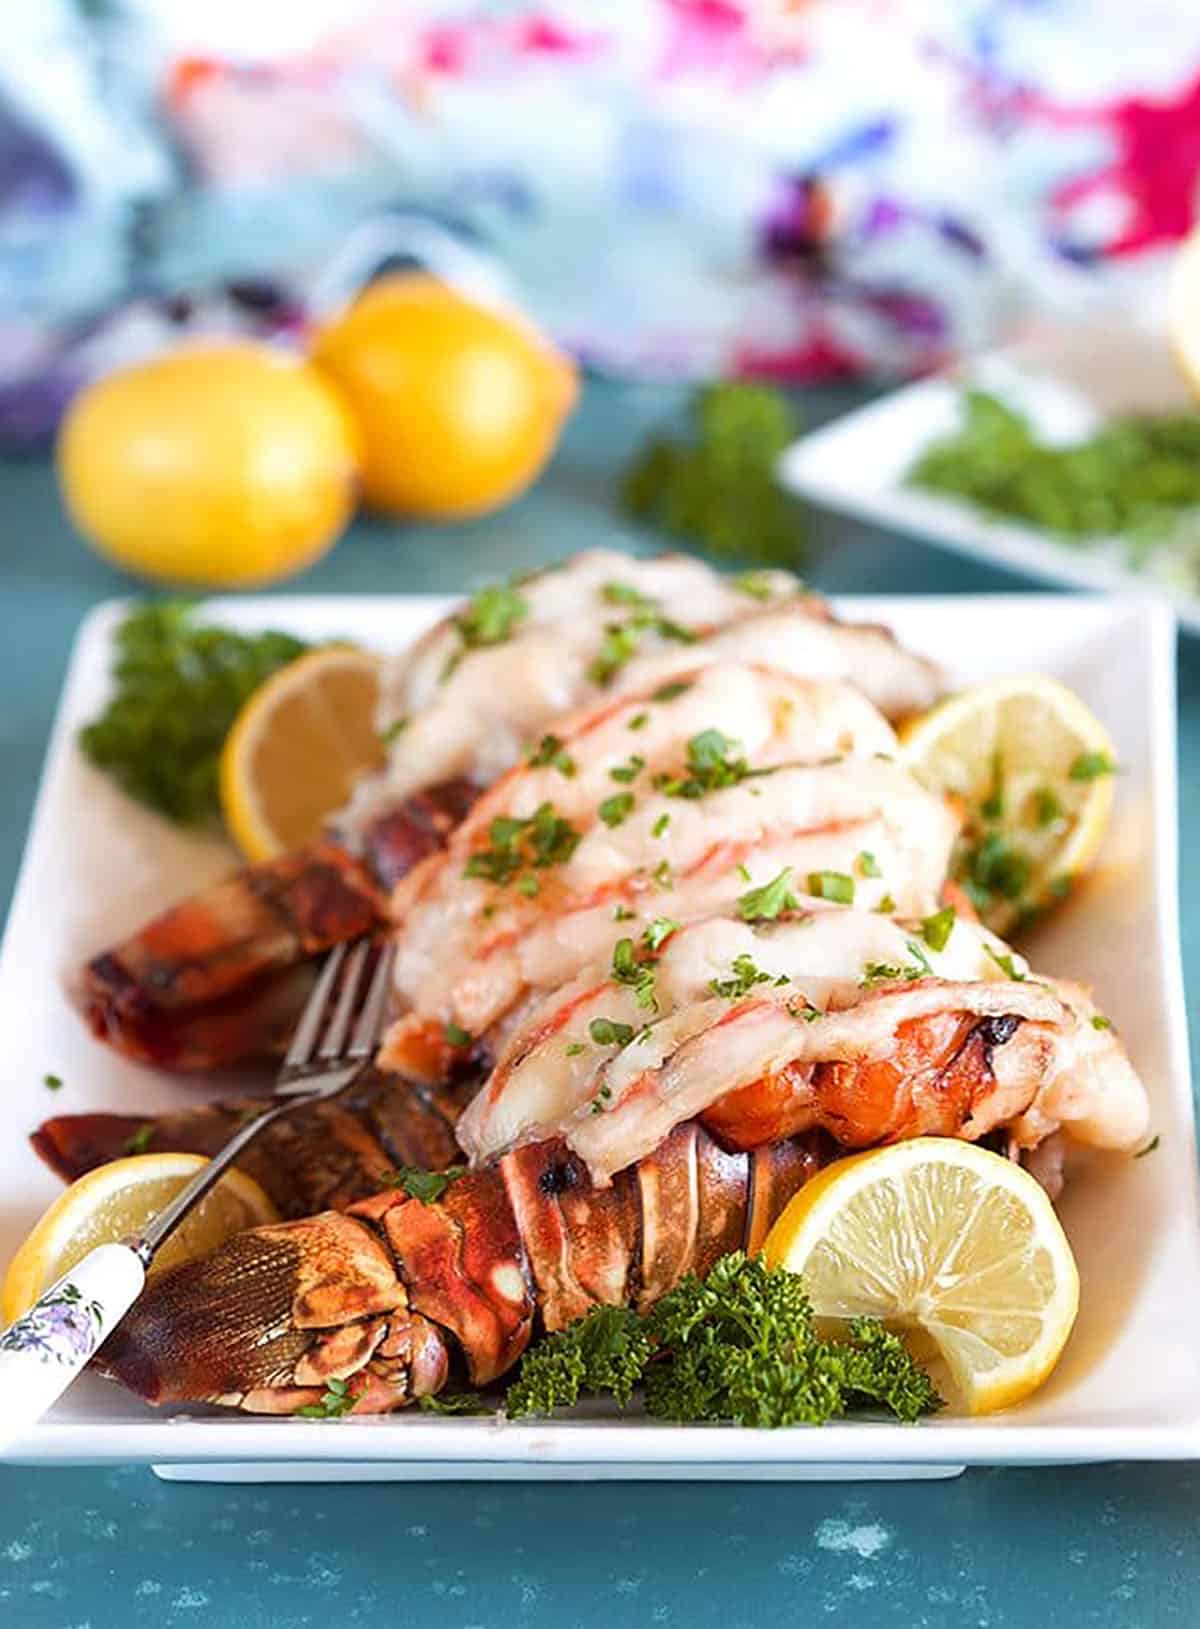 Baked lobster tail on a white platter with lemon and parlsey.